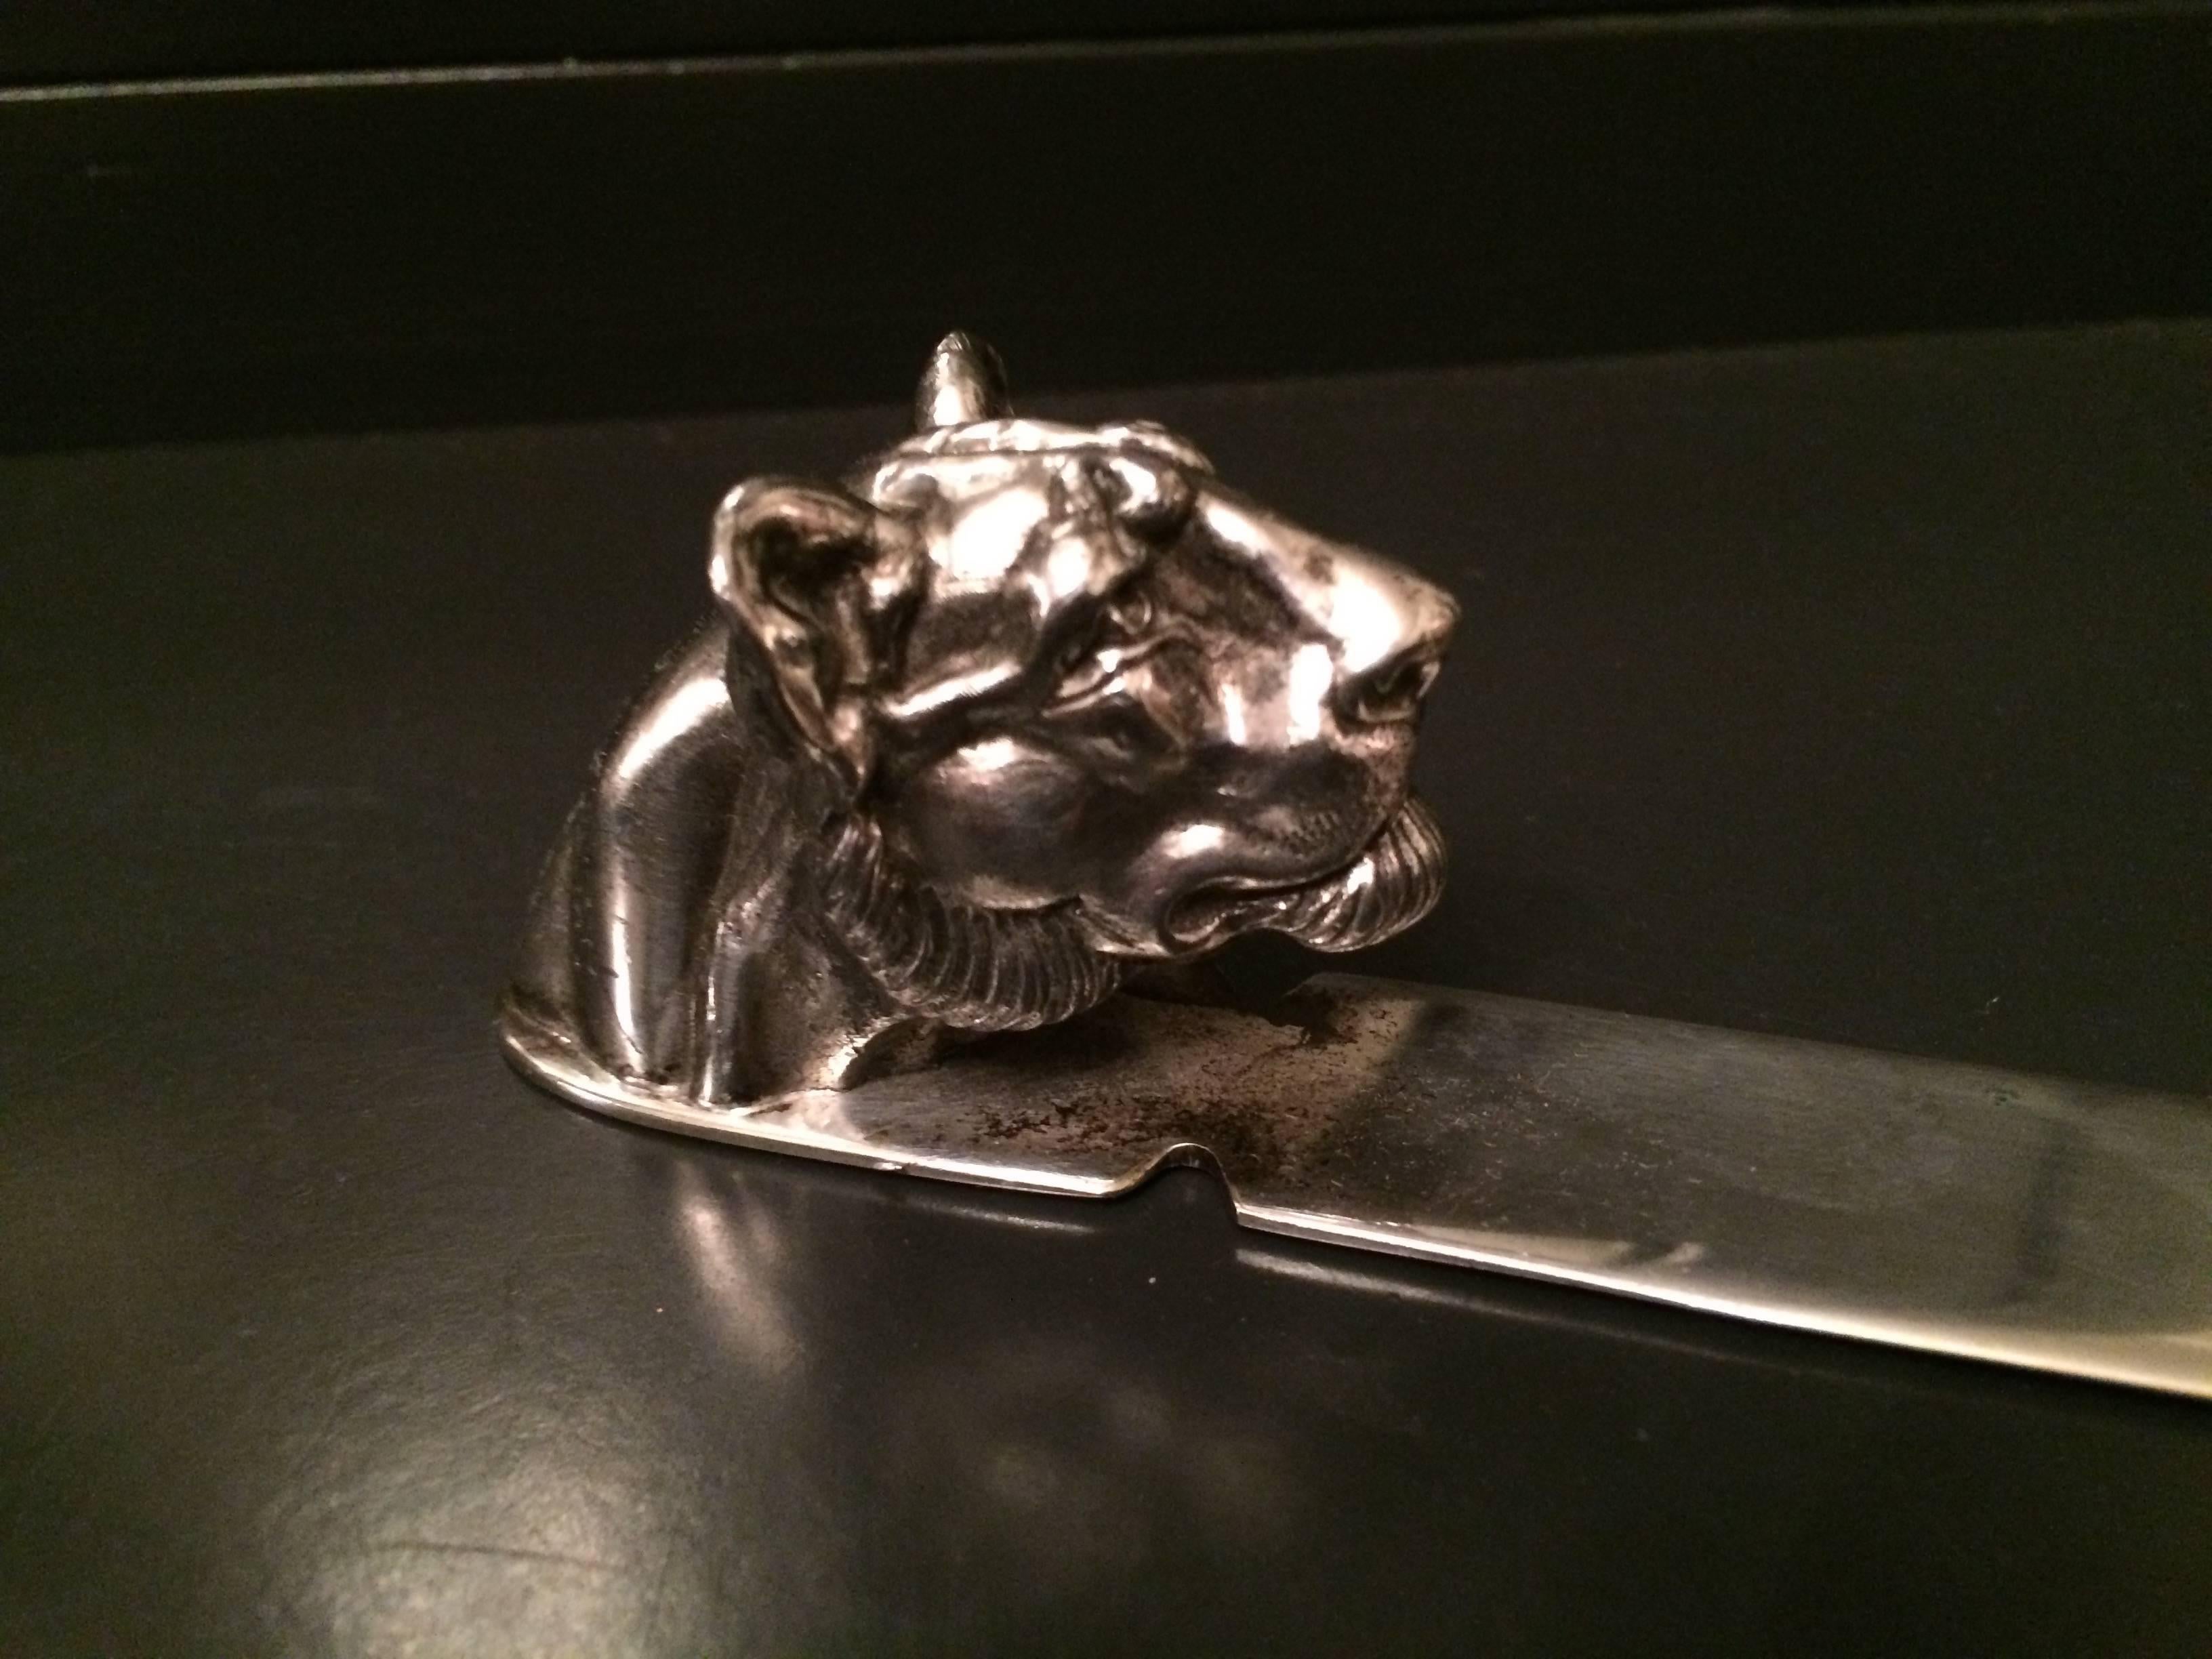 This is a stunning and nicely detailed lions head letter opener by Reed & Barton. The piece is large and carries a nice weight, perfectly used as a letter opener or decorative object / paper weight in any office!